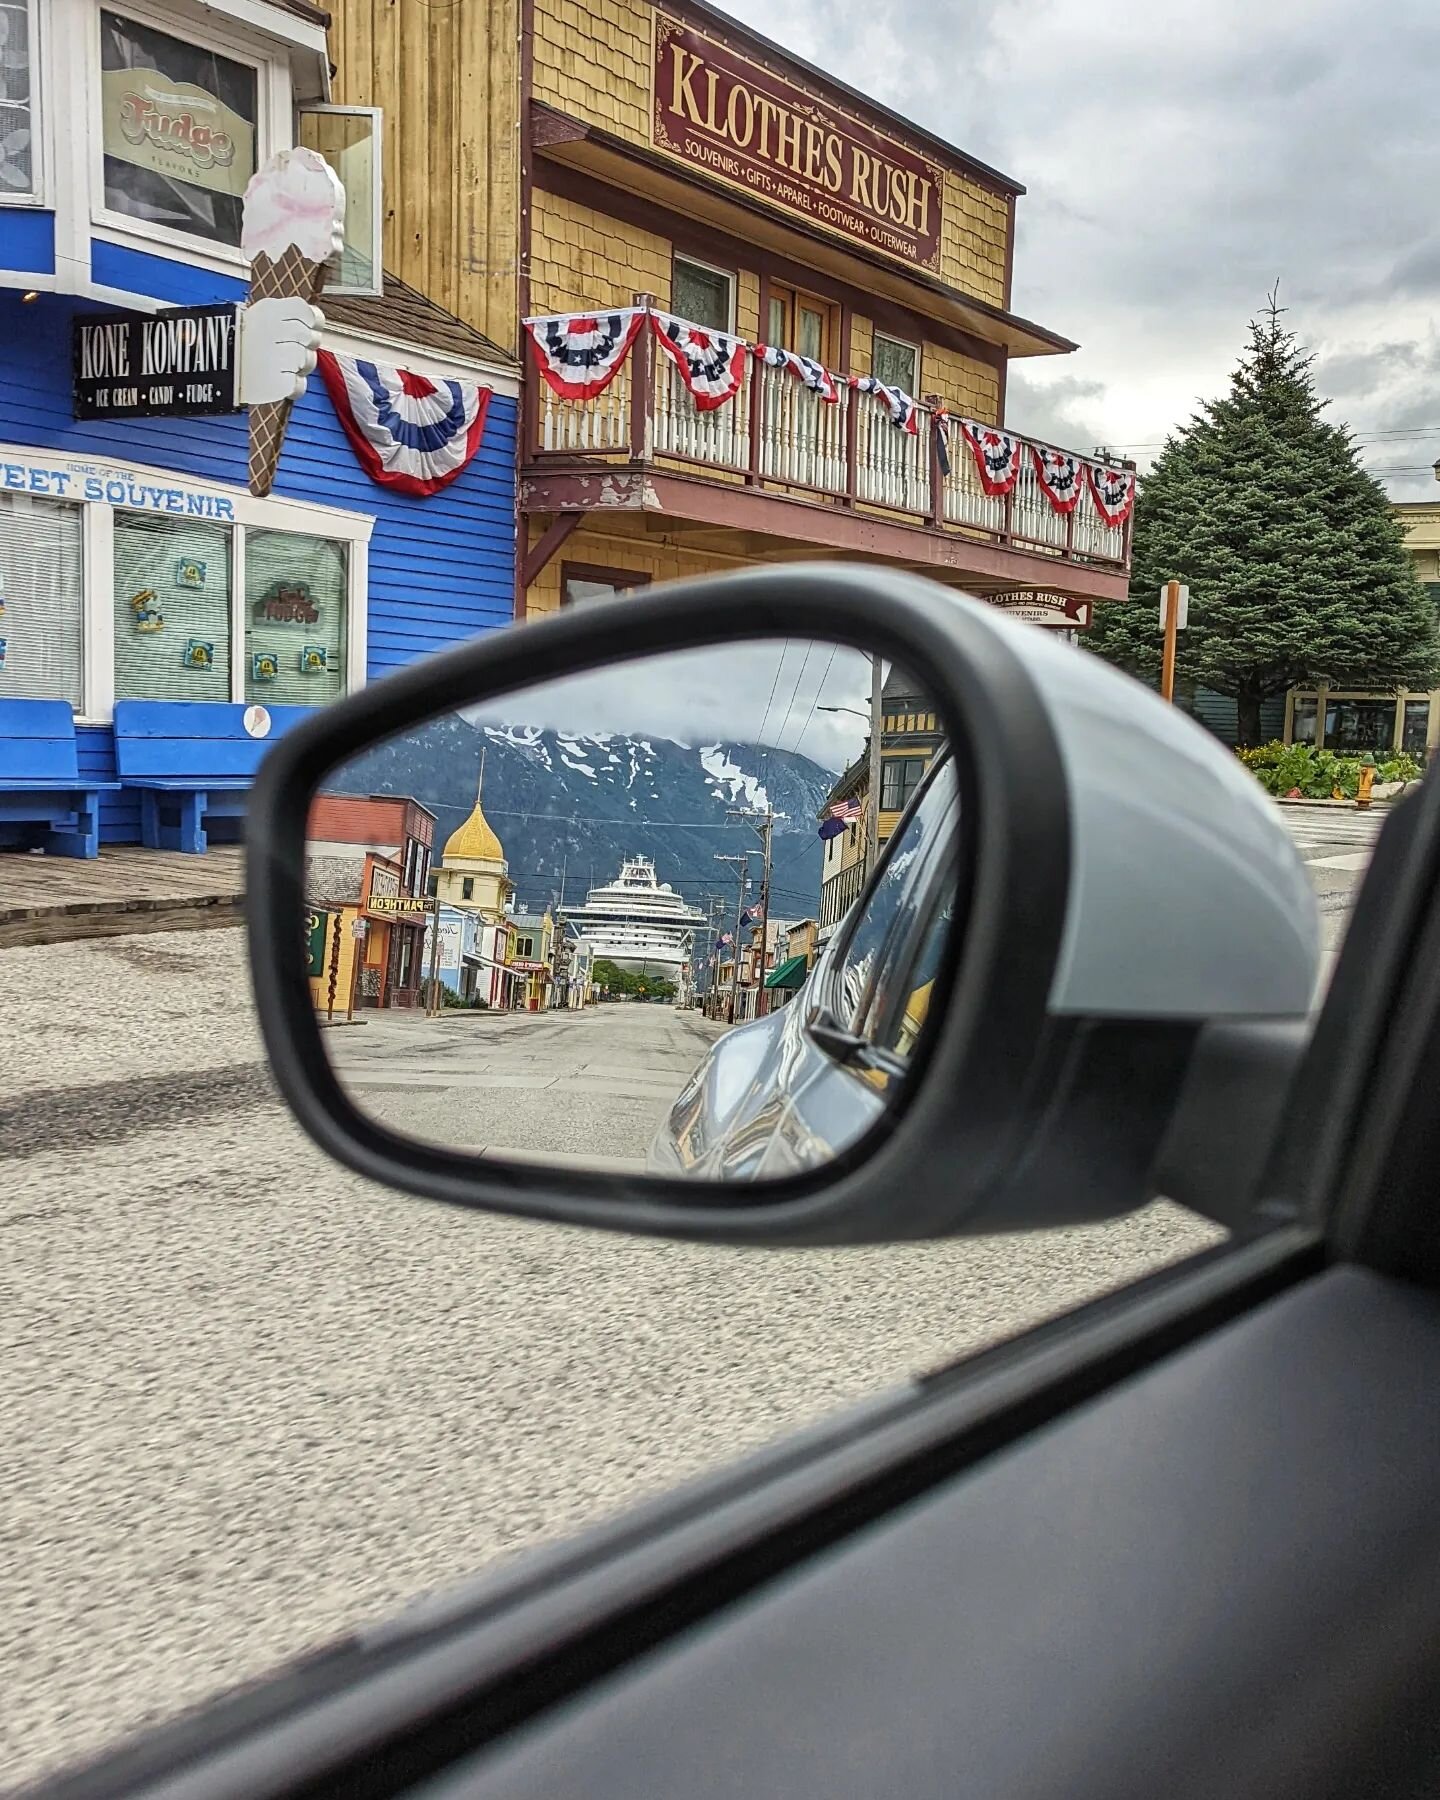 Even the rear view is cool when you are driving the Mach E!

The best way to get around Skagway and the Yukon!  This all electric vehicle is stylish, fun, and kind to the environment. 

Book your rental now!
.
.
.
#klondikeelectric #klondikeelectricc